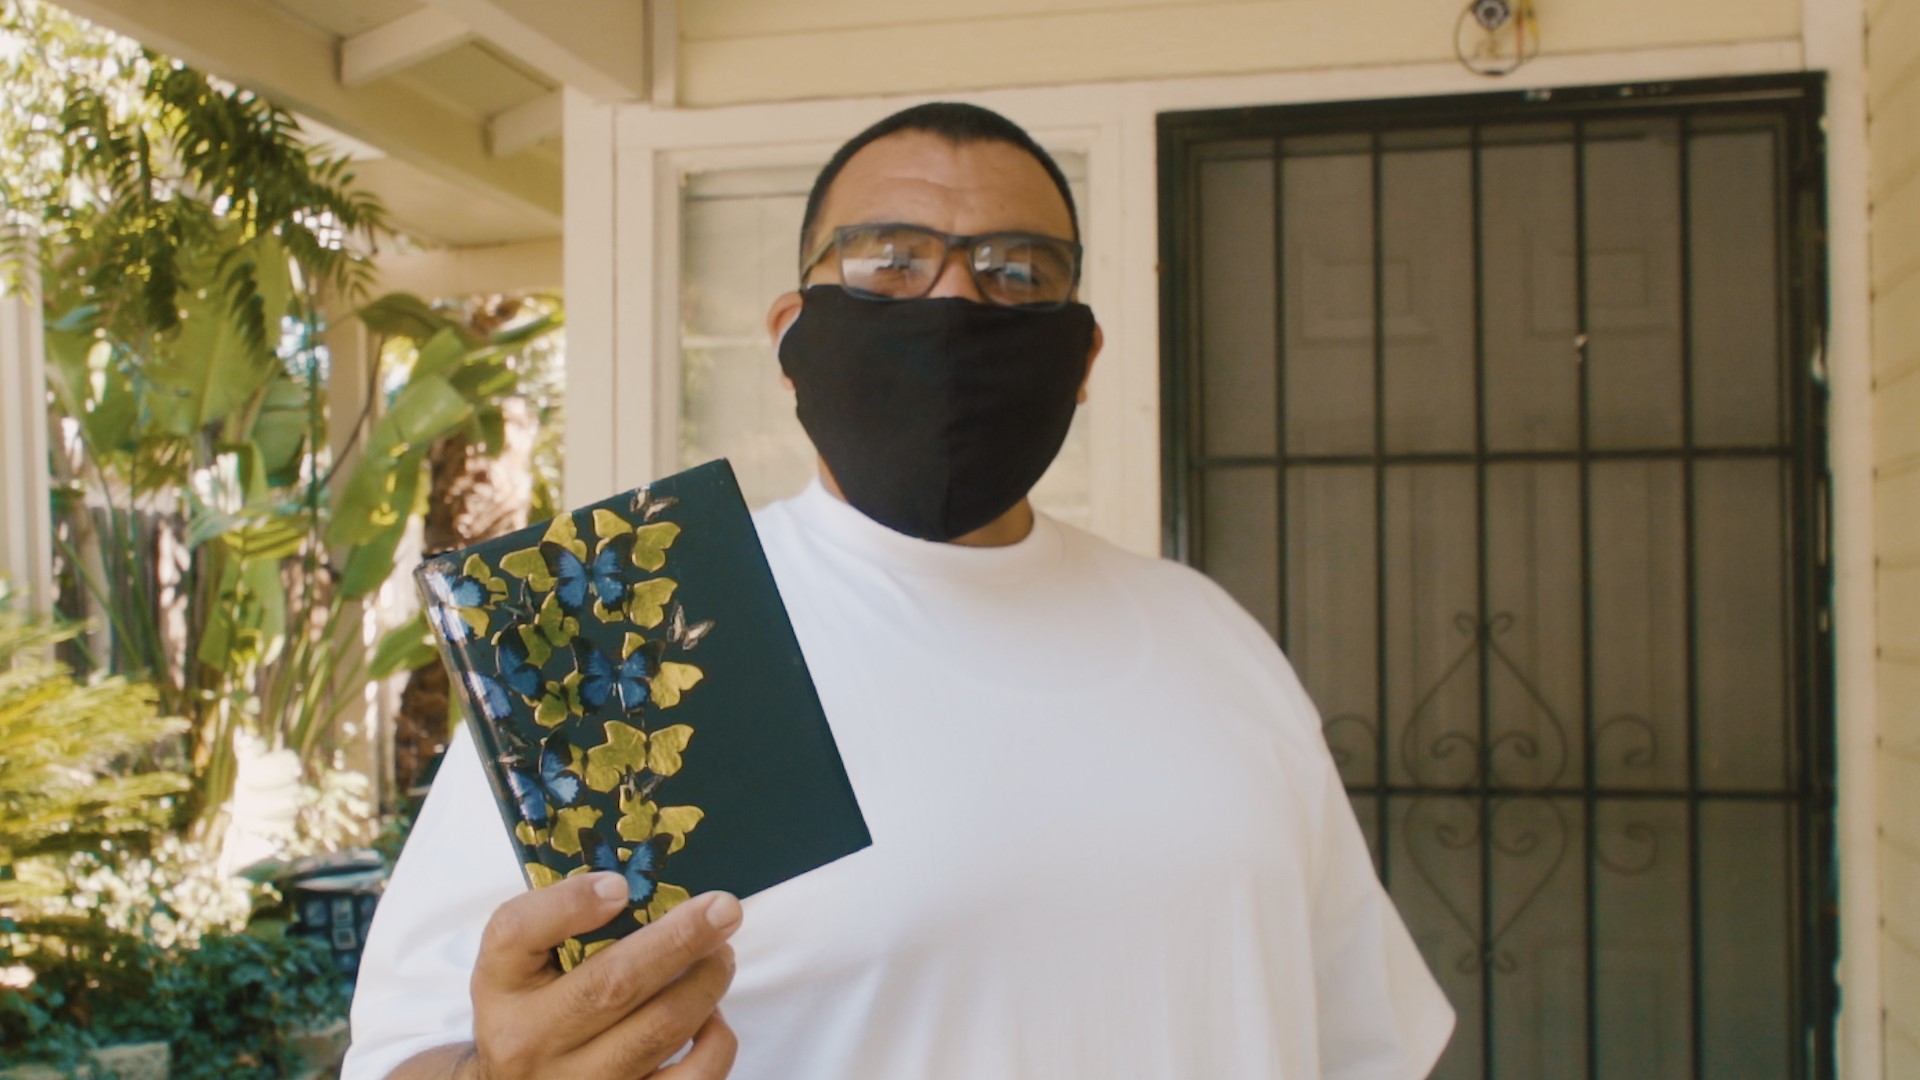 Luis Martinez found a journal while detailing cars at his job in Rio Linda. Once he flipped through a few pages, what struck him was the love and detail that went in